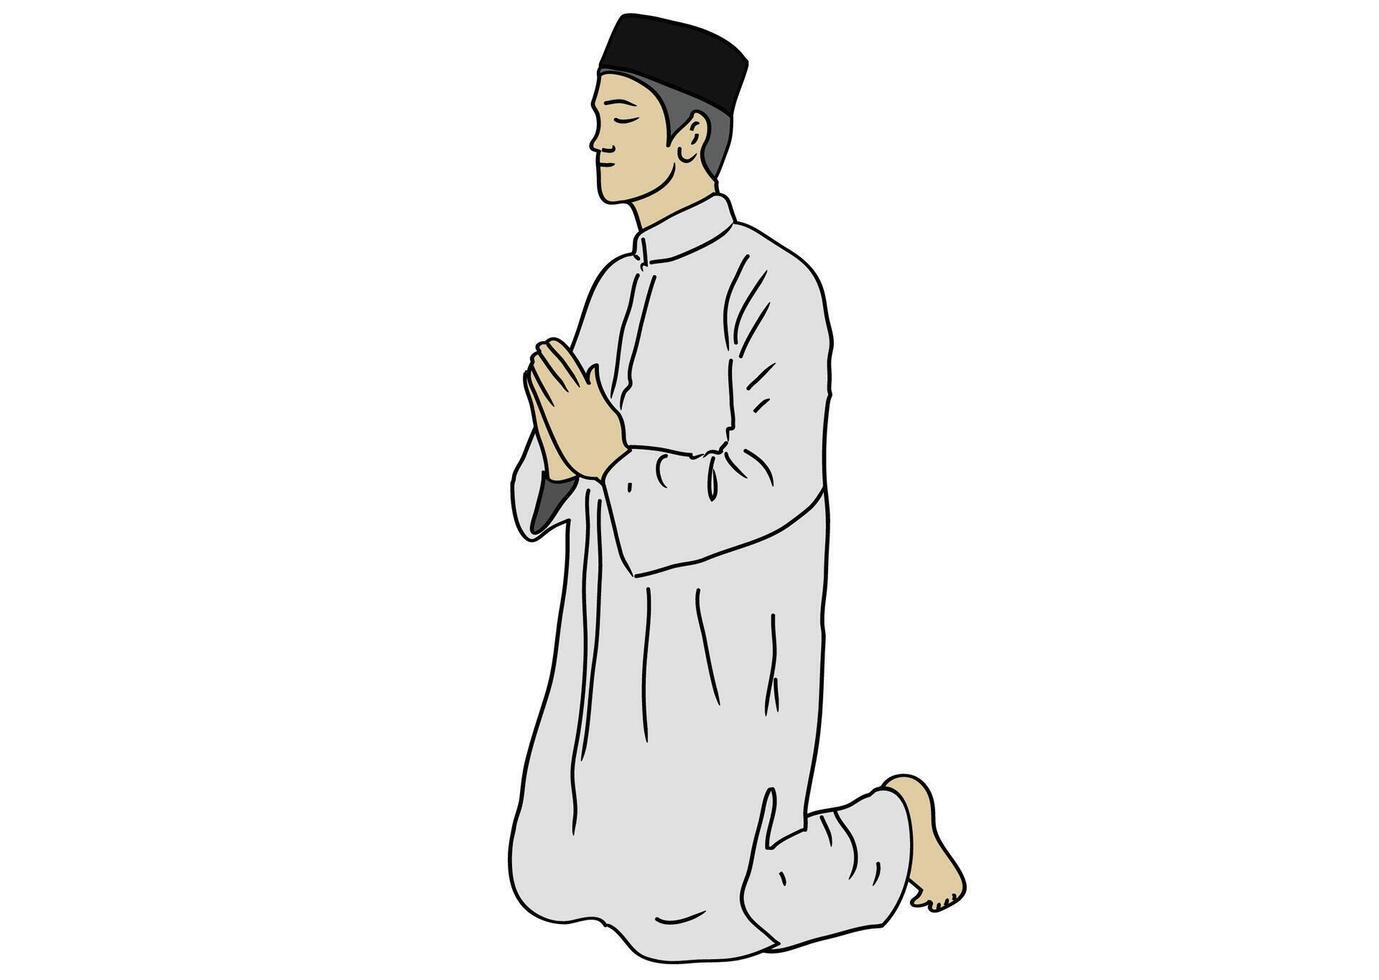 A man dressed in Muslim clothing appears to be praying with his hands vector